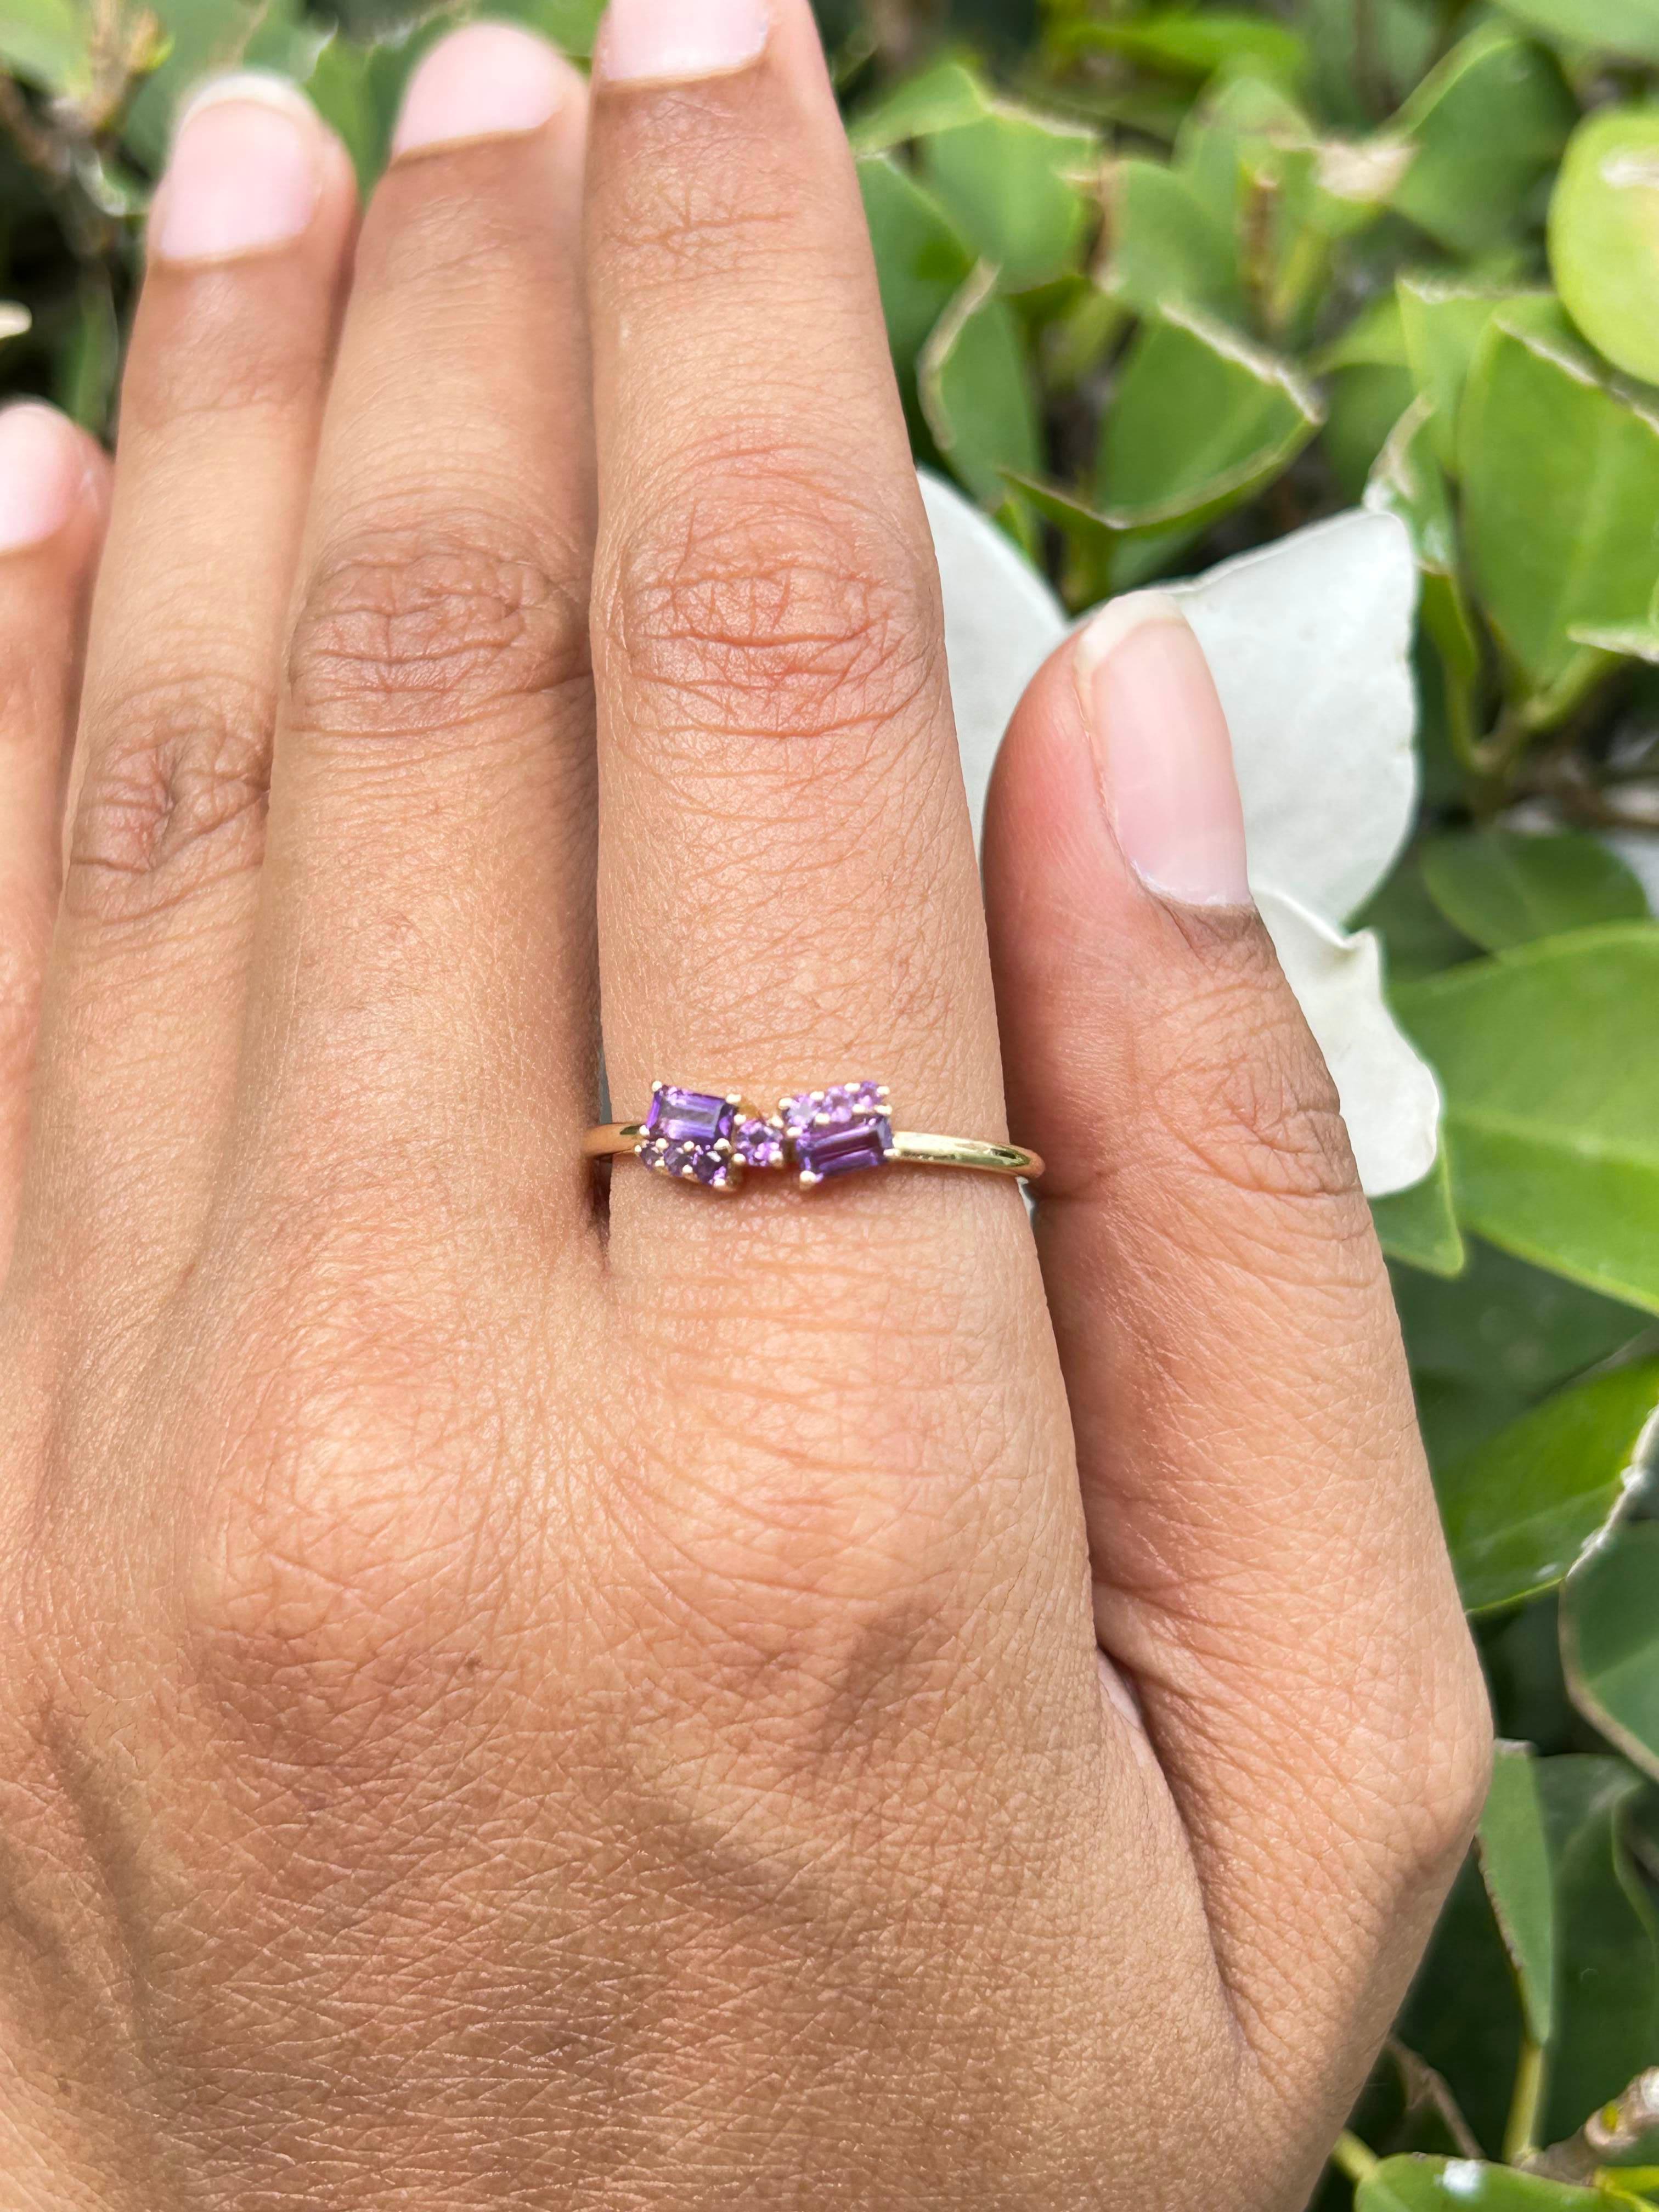 For Sale:  Everyday Wear Asymmetrical Amethyst Ring For Her in 14k Solid Yellow Gold 8